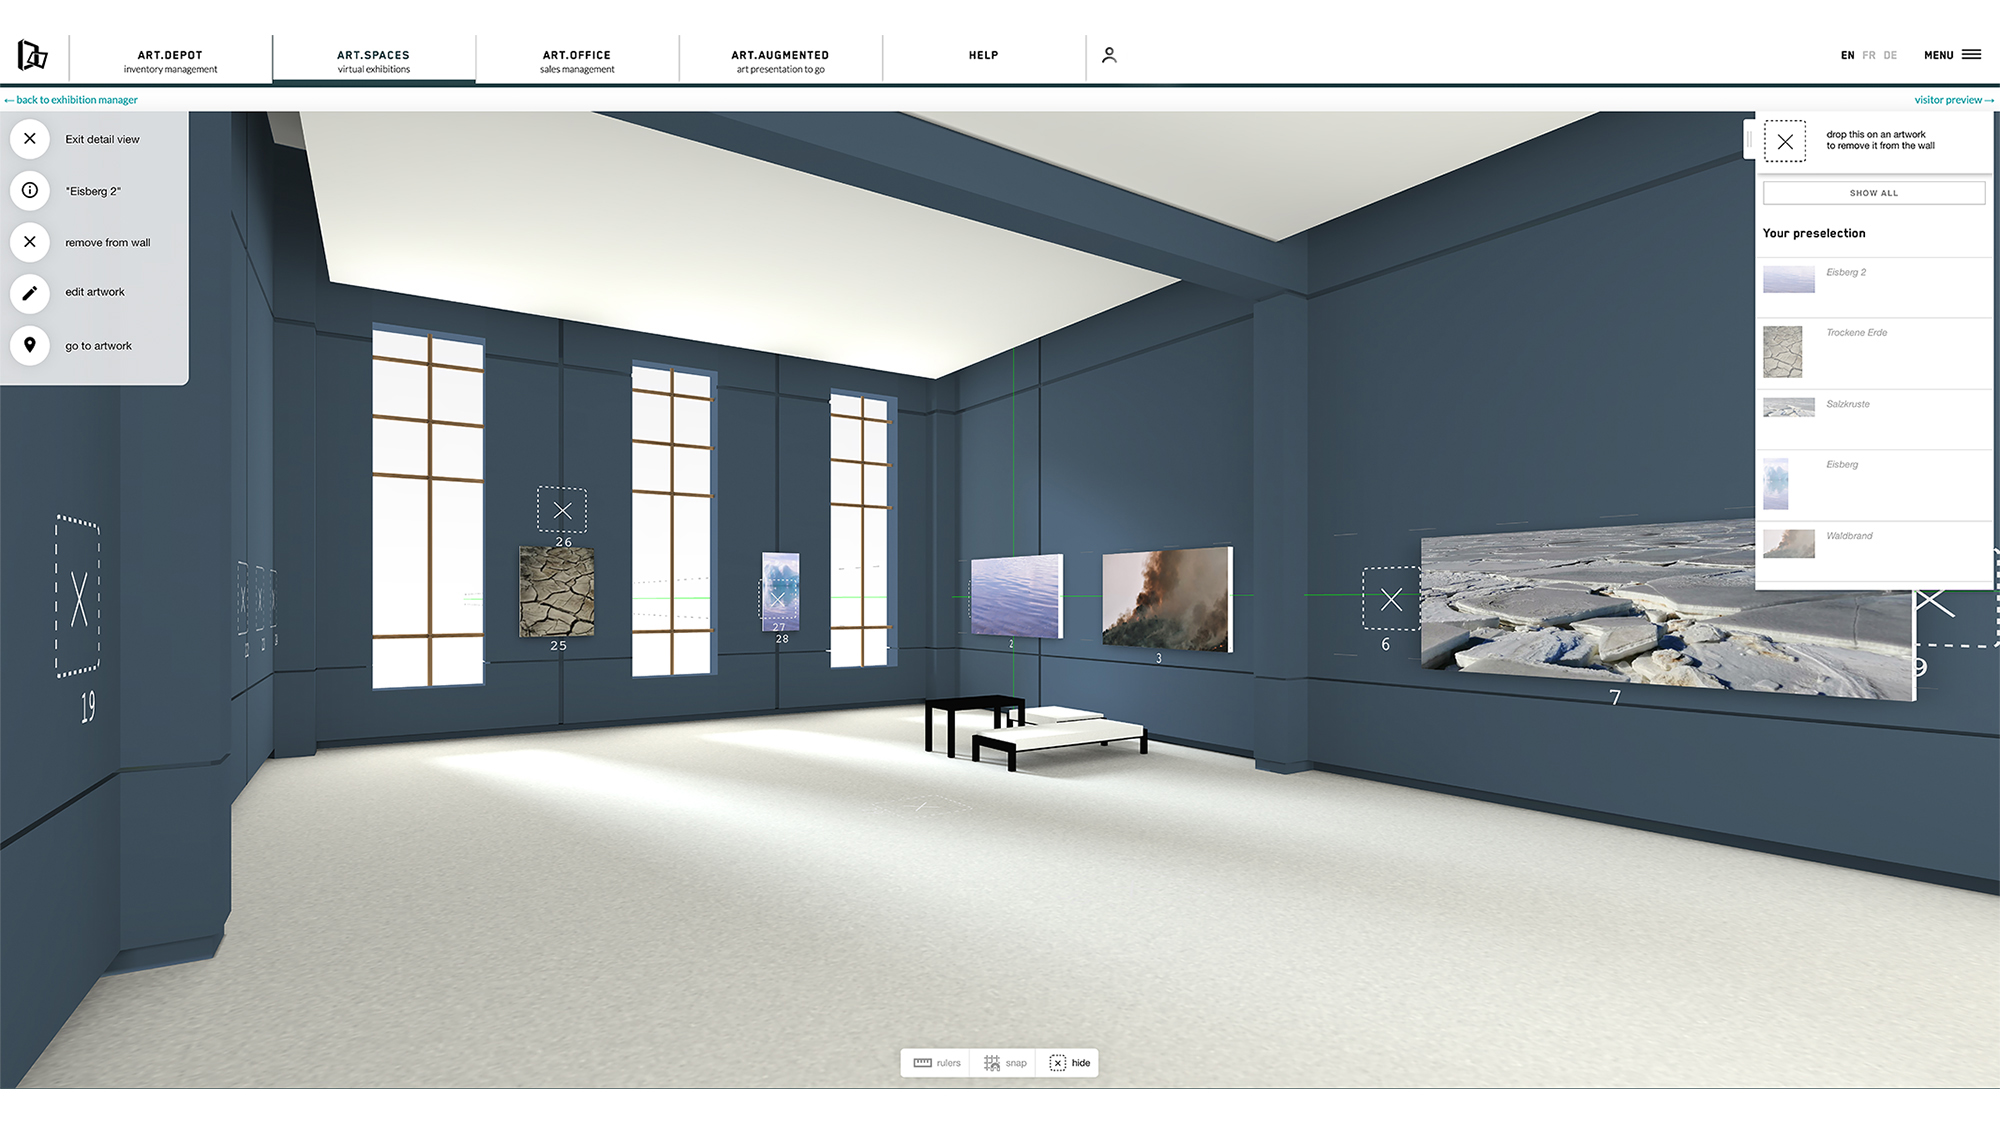 The image shows the user interface of a virtual exhibition room with dark blue wall paint and two large windows. There are already some pictures hanging on the walls, photographs of withered soil, forest fires, melted icebergs. A picture is being positioned, supported by green measure lines.